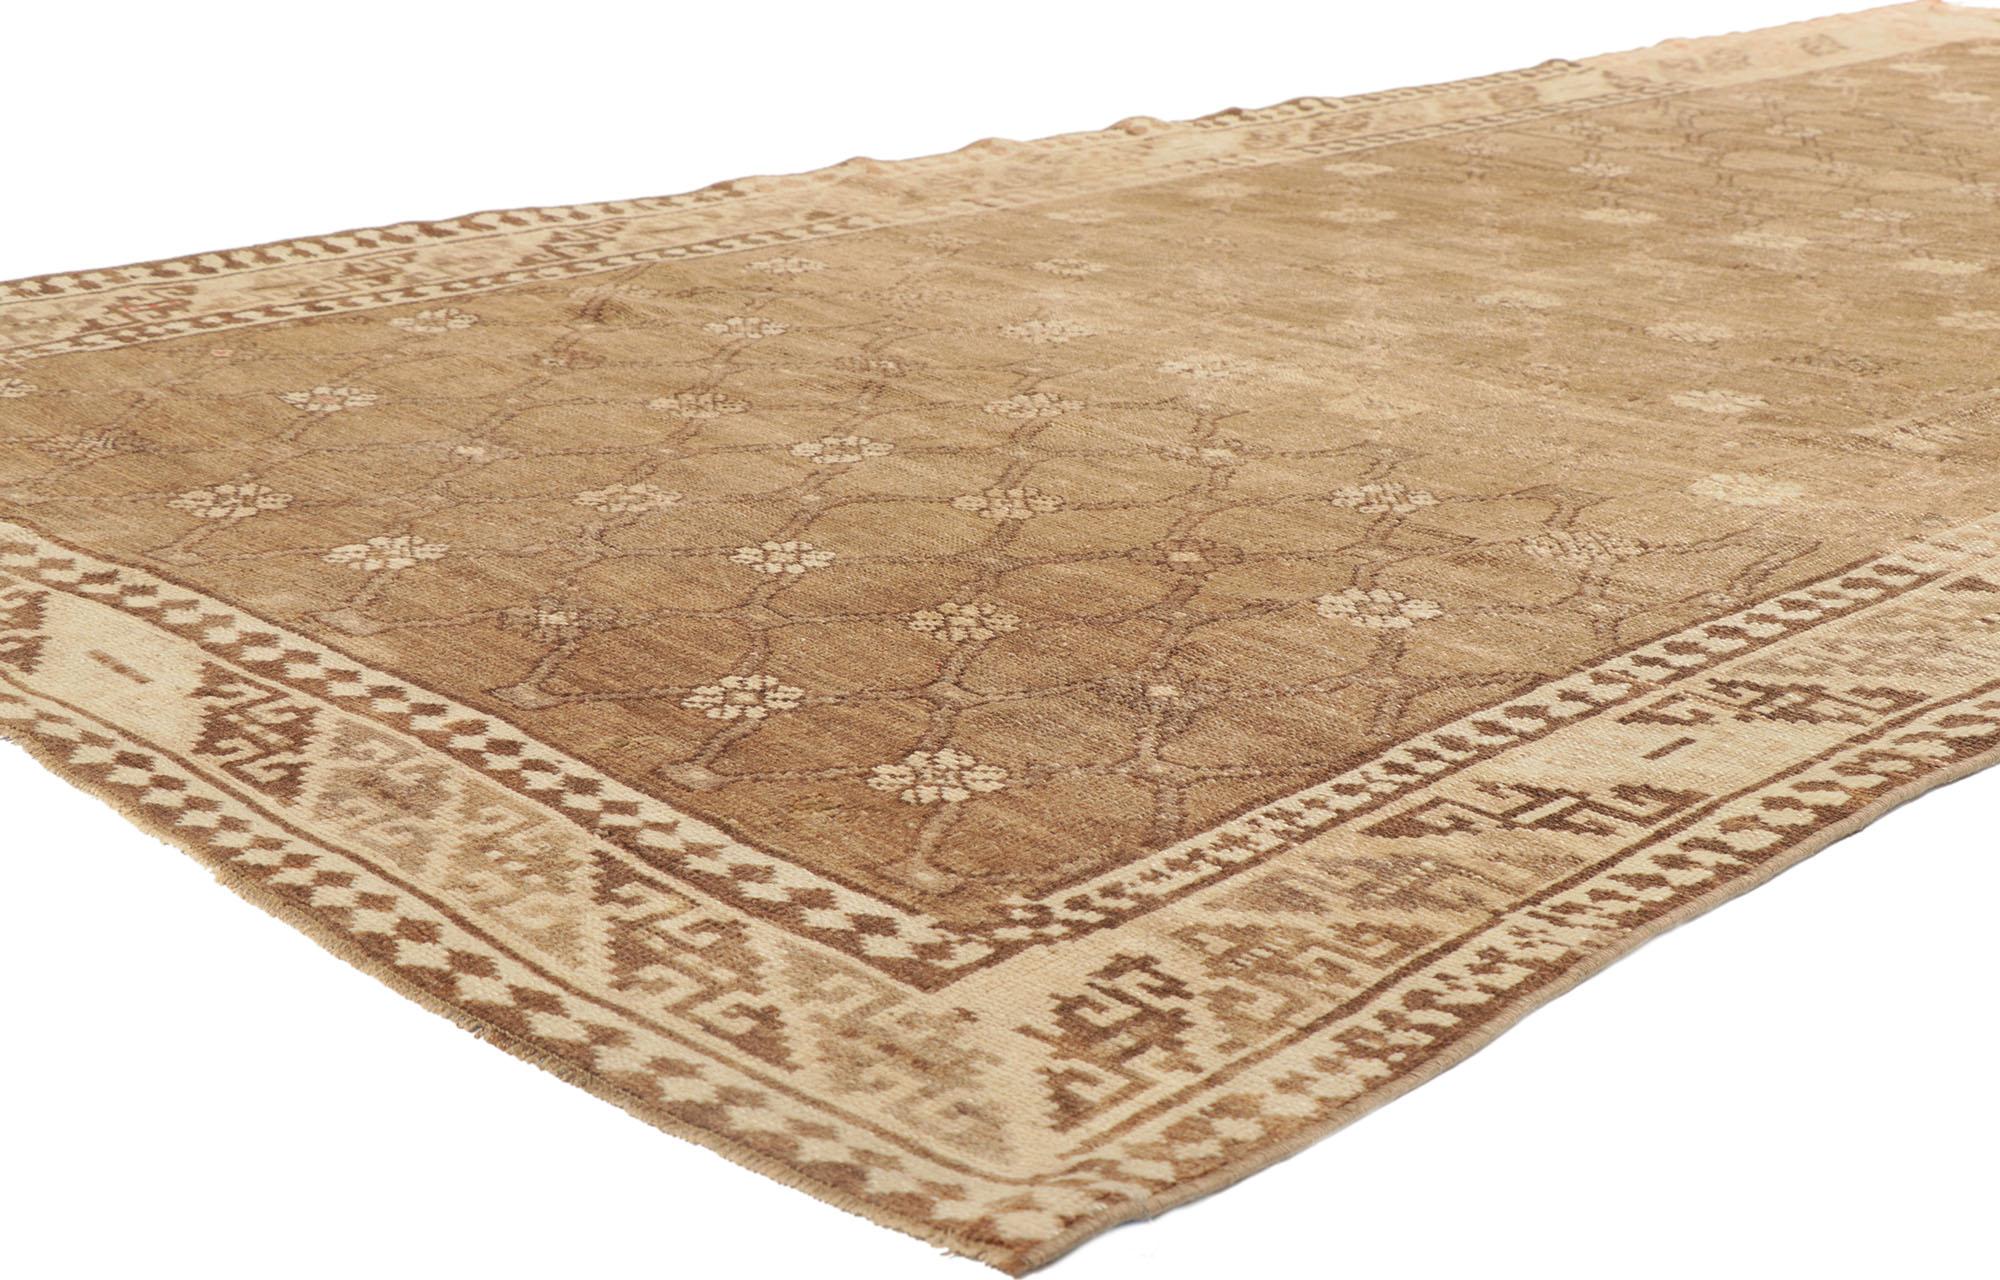 53723 Vintage Brown Turkish Kars Rug, 05'06 x 11'06. 
From the historic city of Kars, nestled in the northeastern corner of Turkey, emerge the magnificent handwoven treasures known as Kars rugs, steeped in centuries-old tradition. These rugs boast